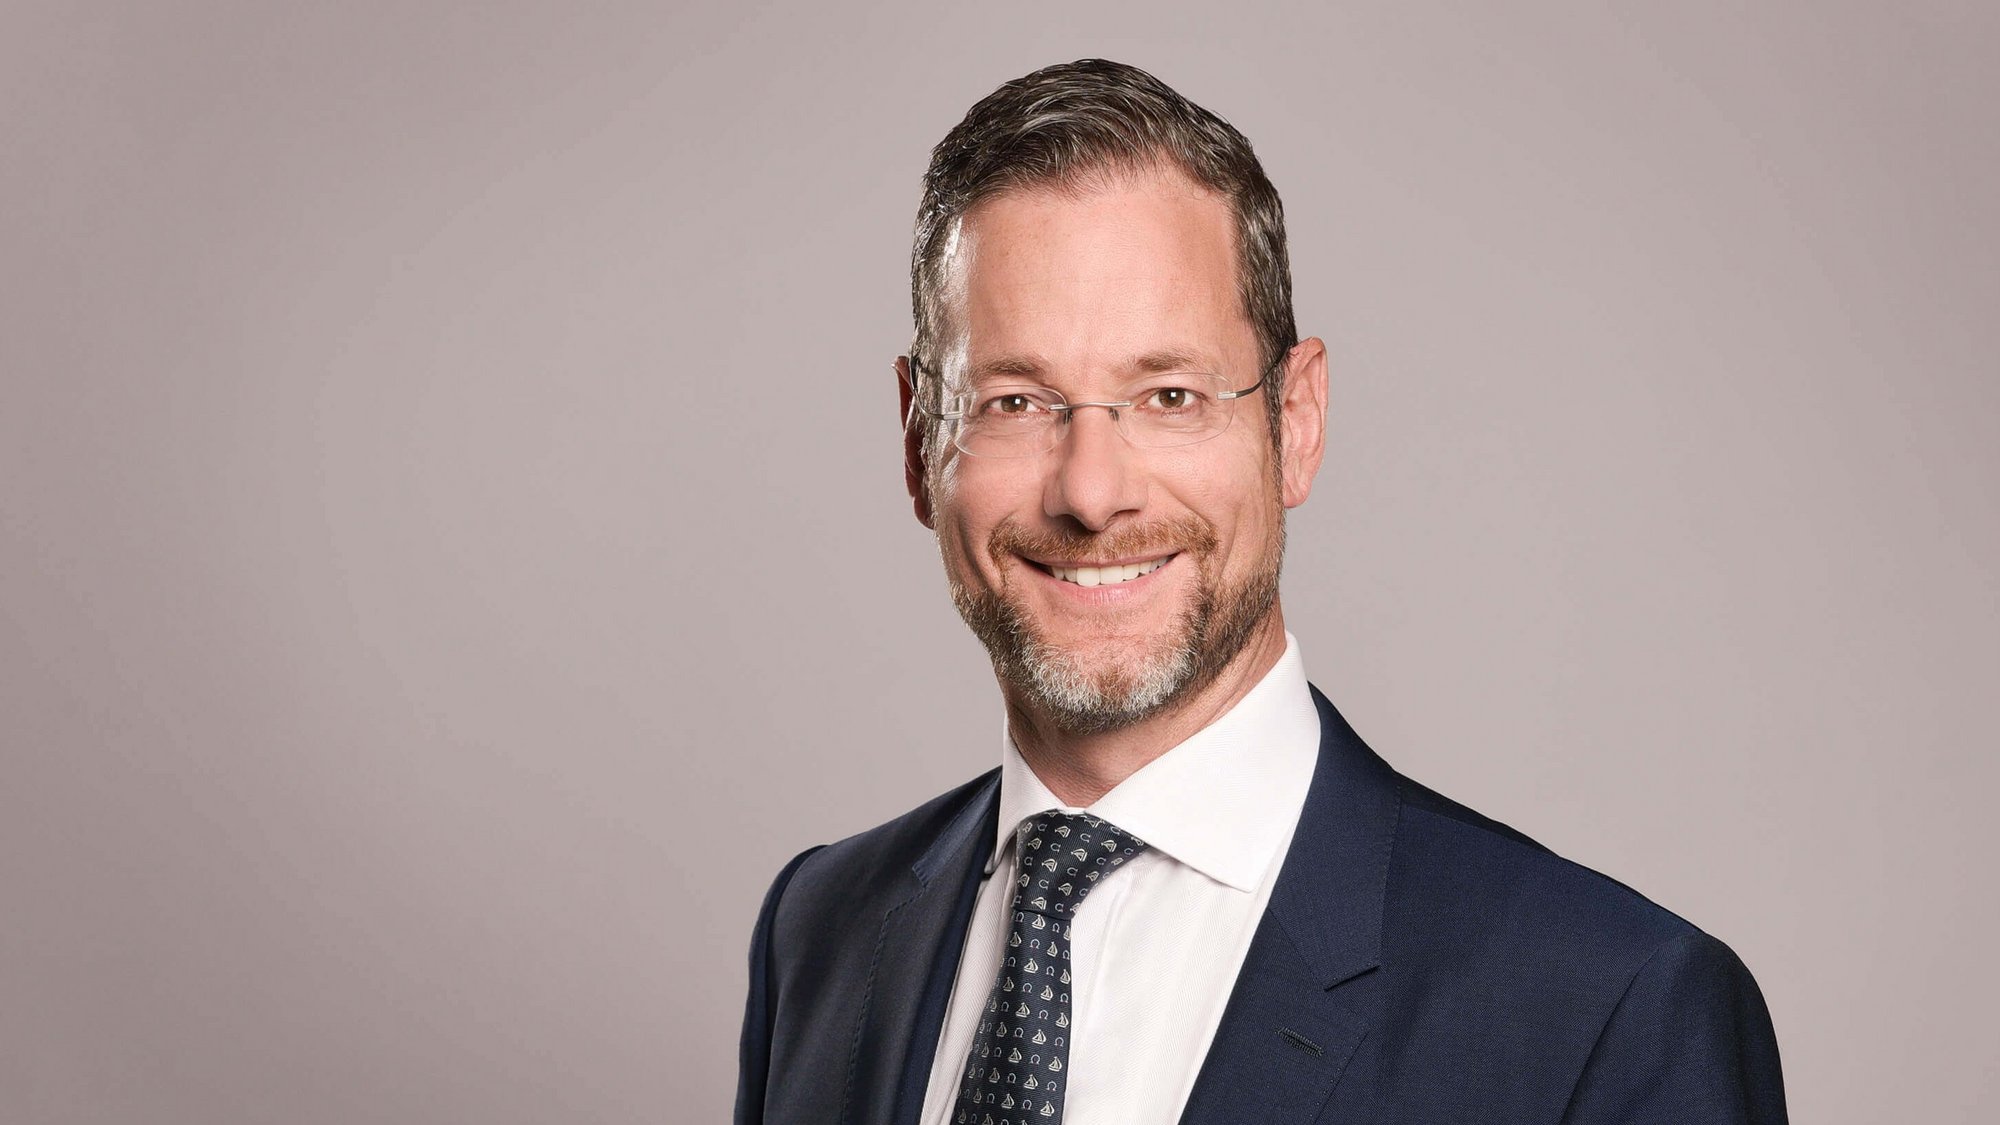 InCore Bank appoints Dr. Daniel Diemers as new member of the Board of Directors